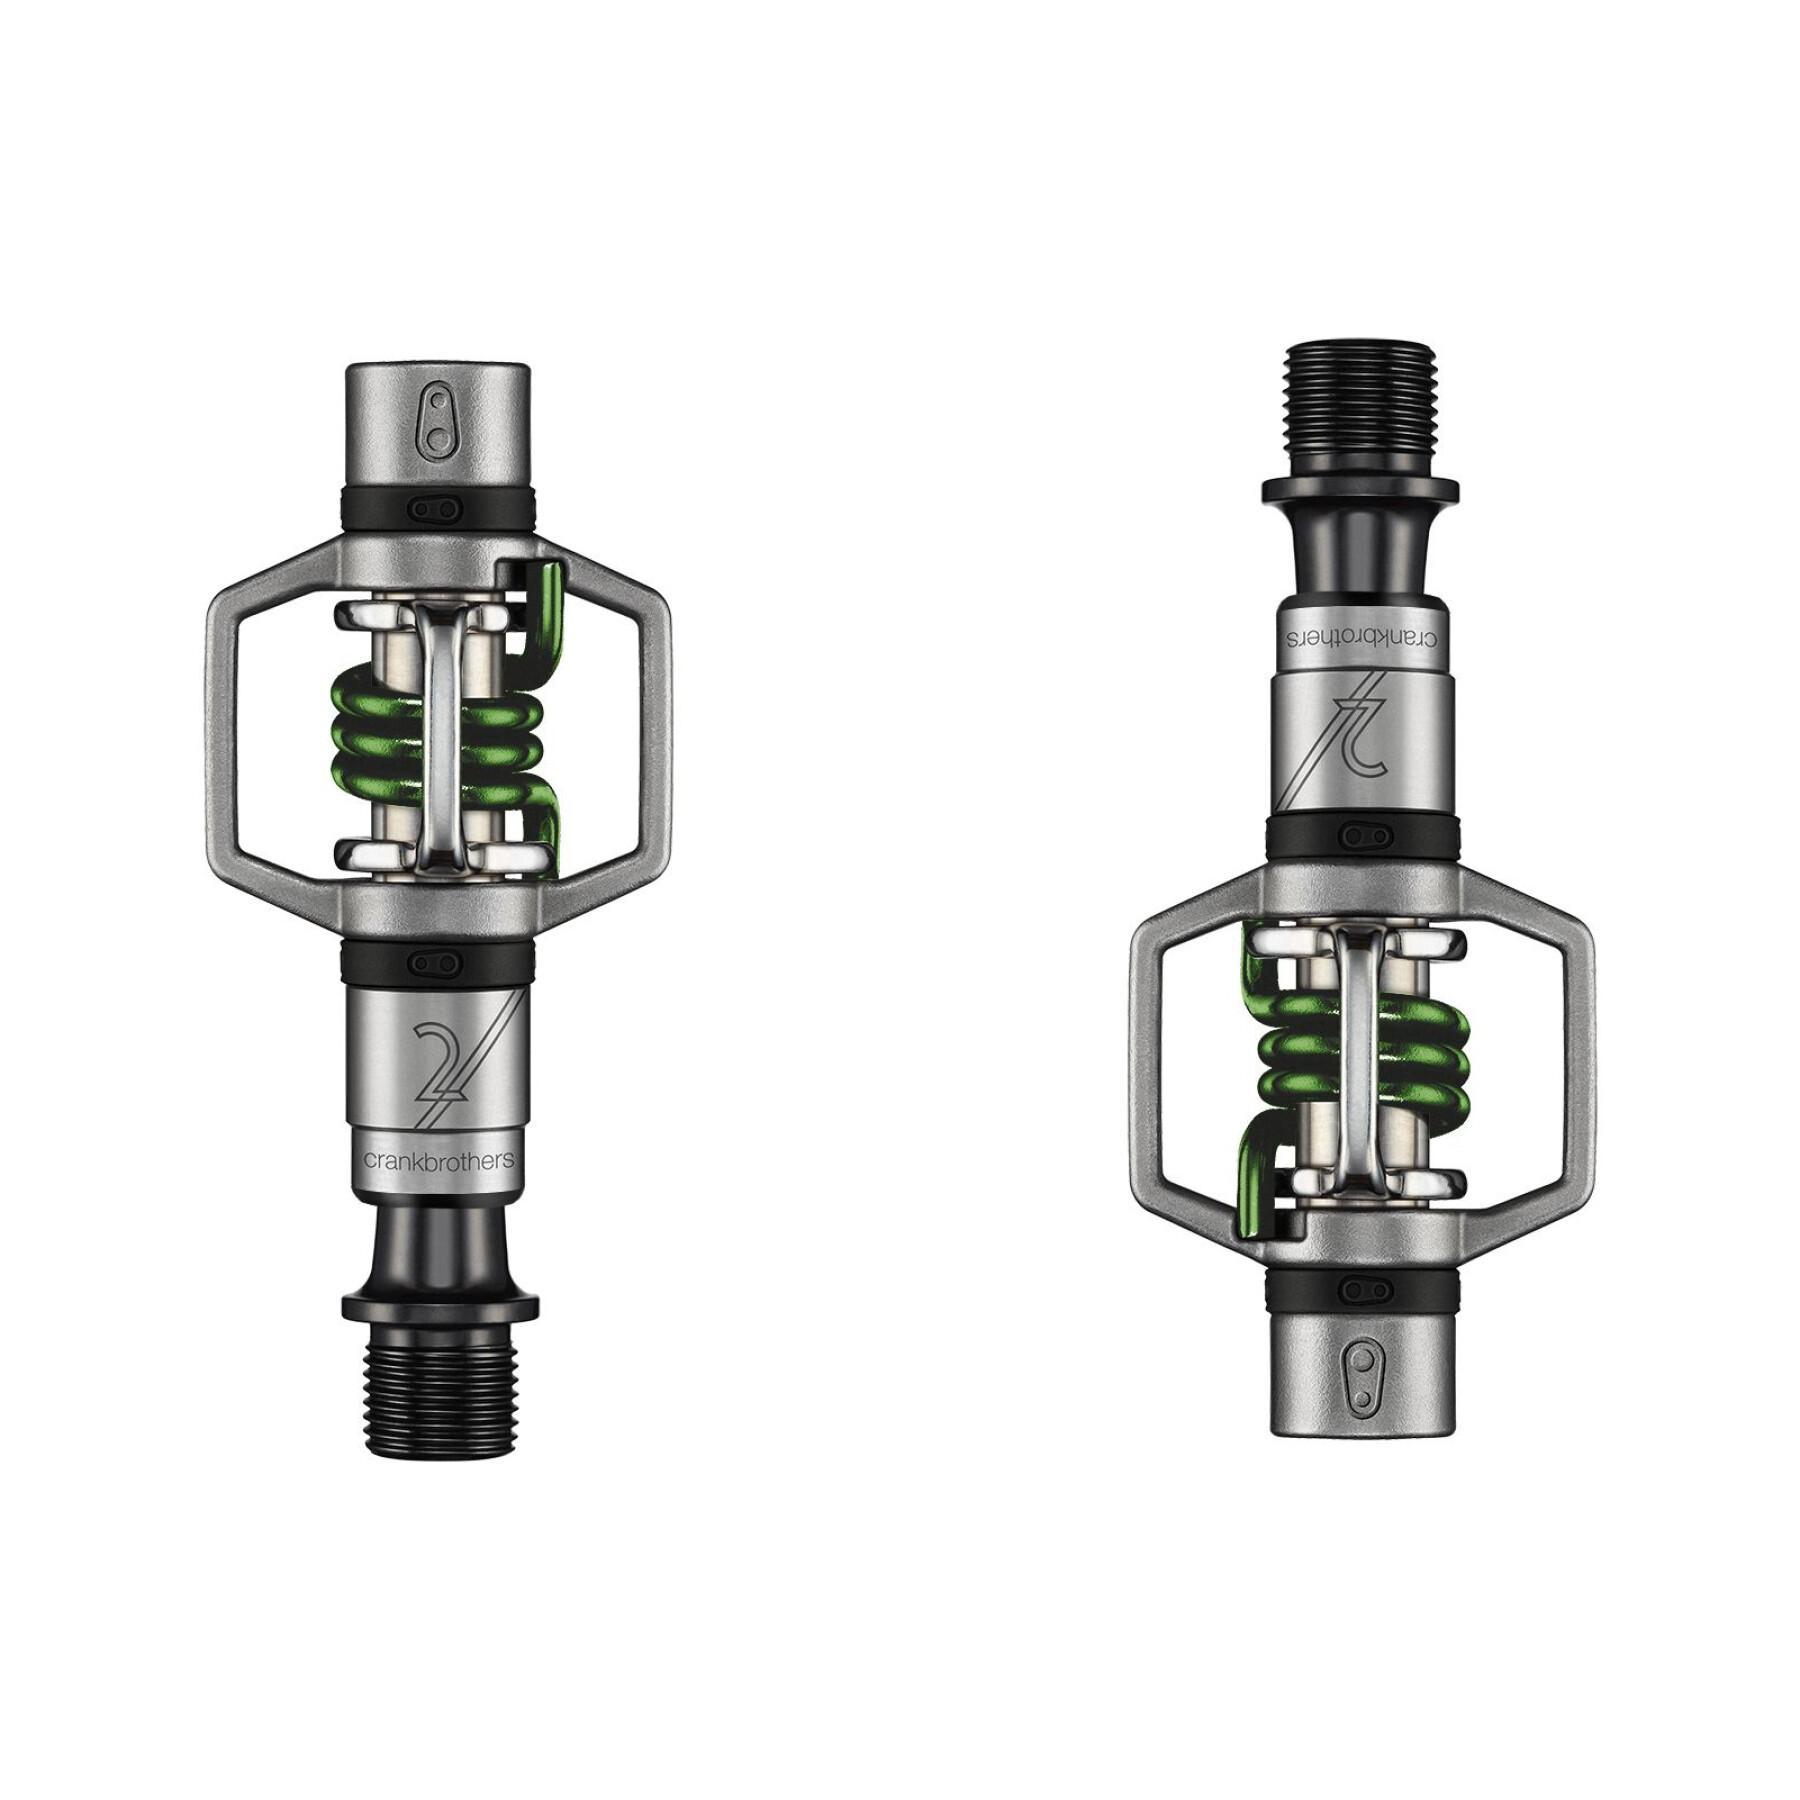 Spring steel pedals crankbrothers egg beater 2